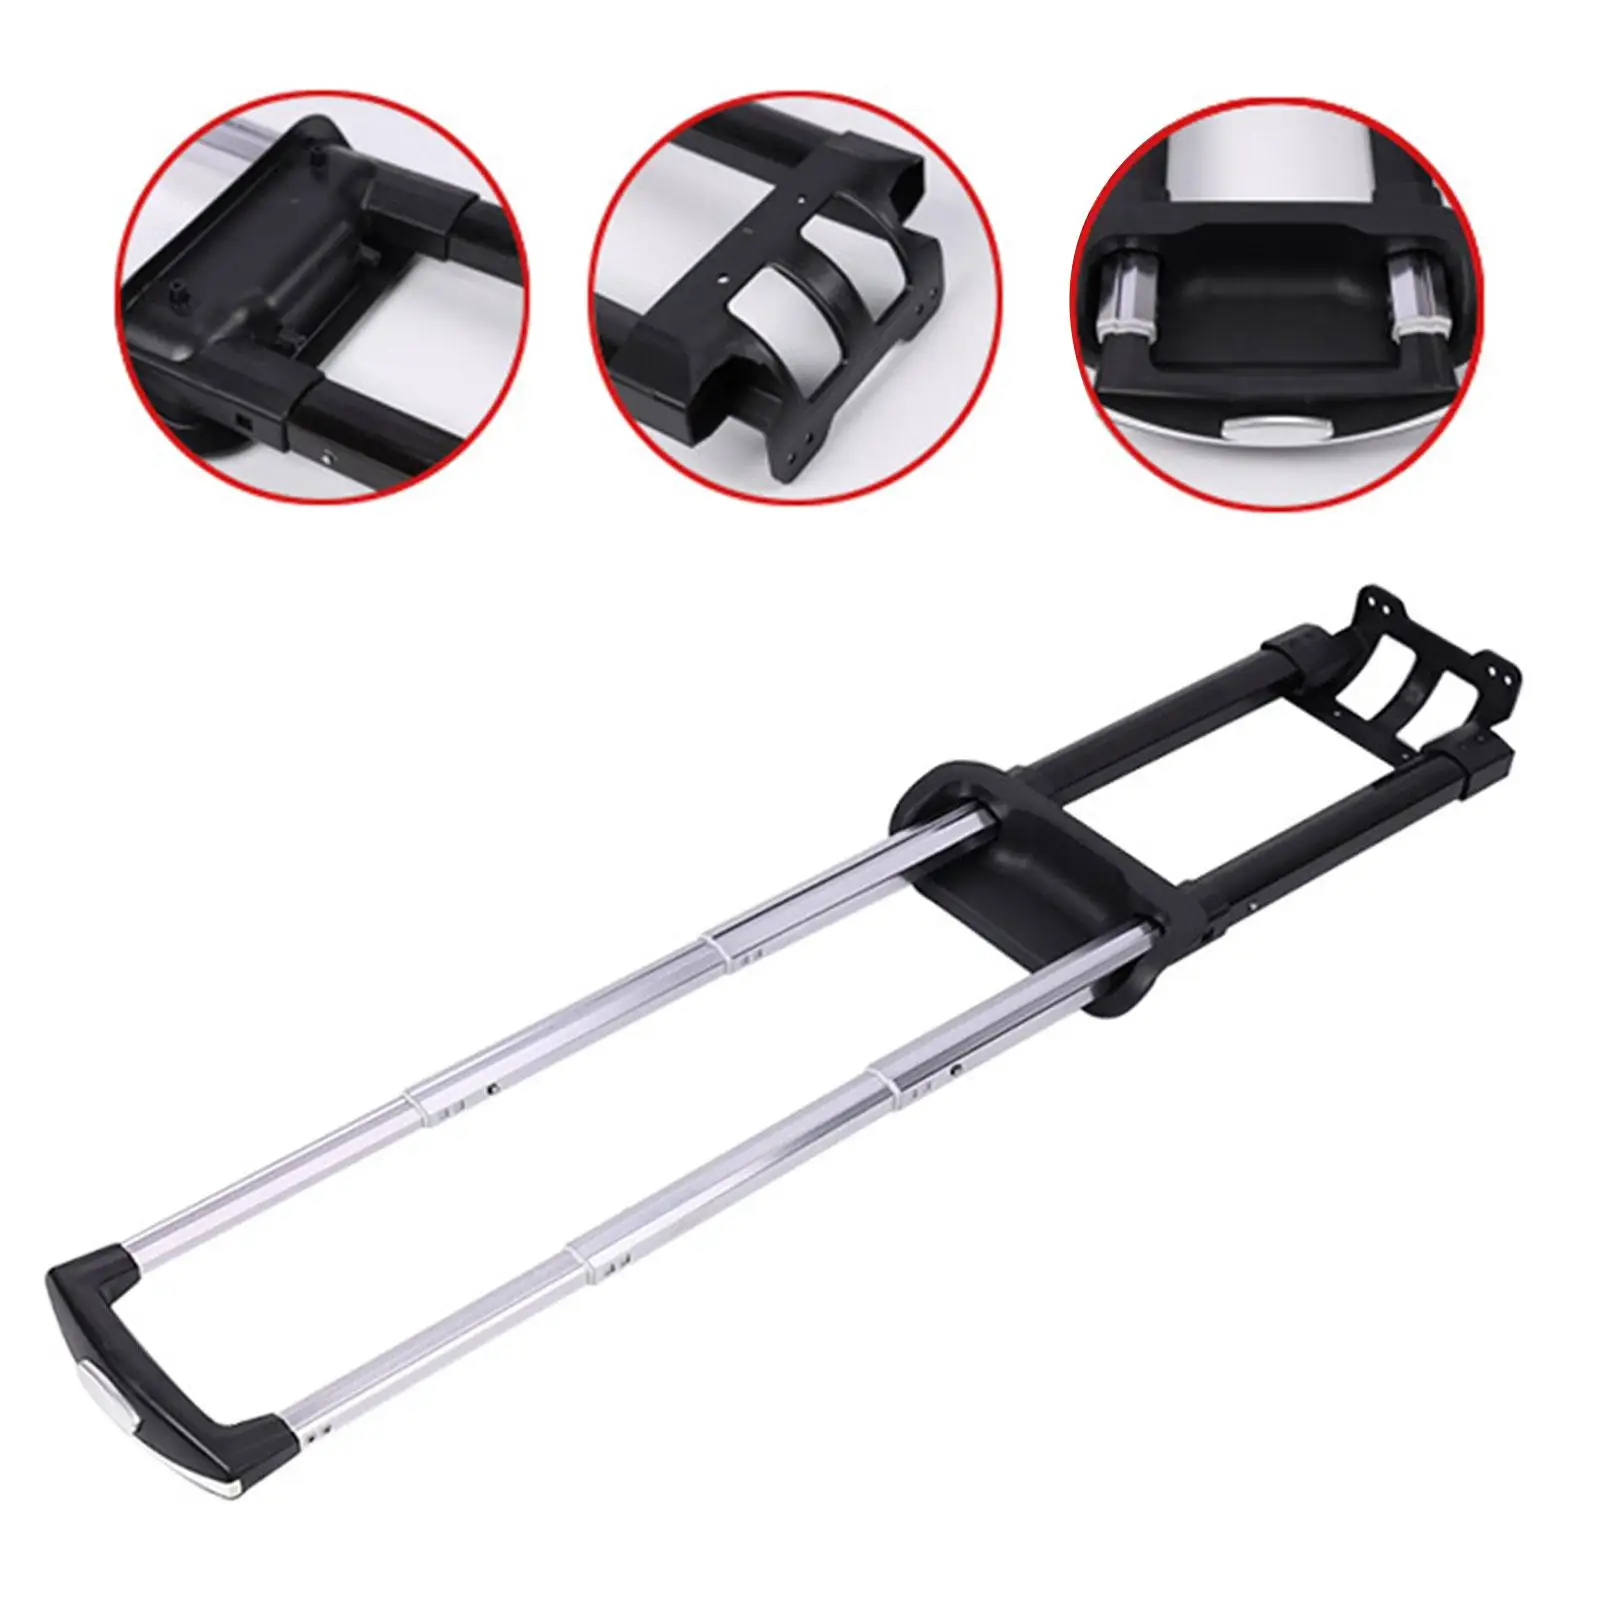 Telescopic Handle Trolley Luggage Bag Accessory Part Iron Carrying Case Traveling Bag Suitcase Pull Out Rod Spare Travel Luggage